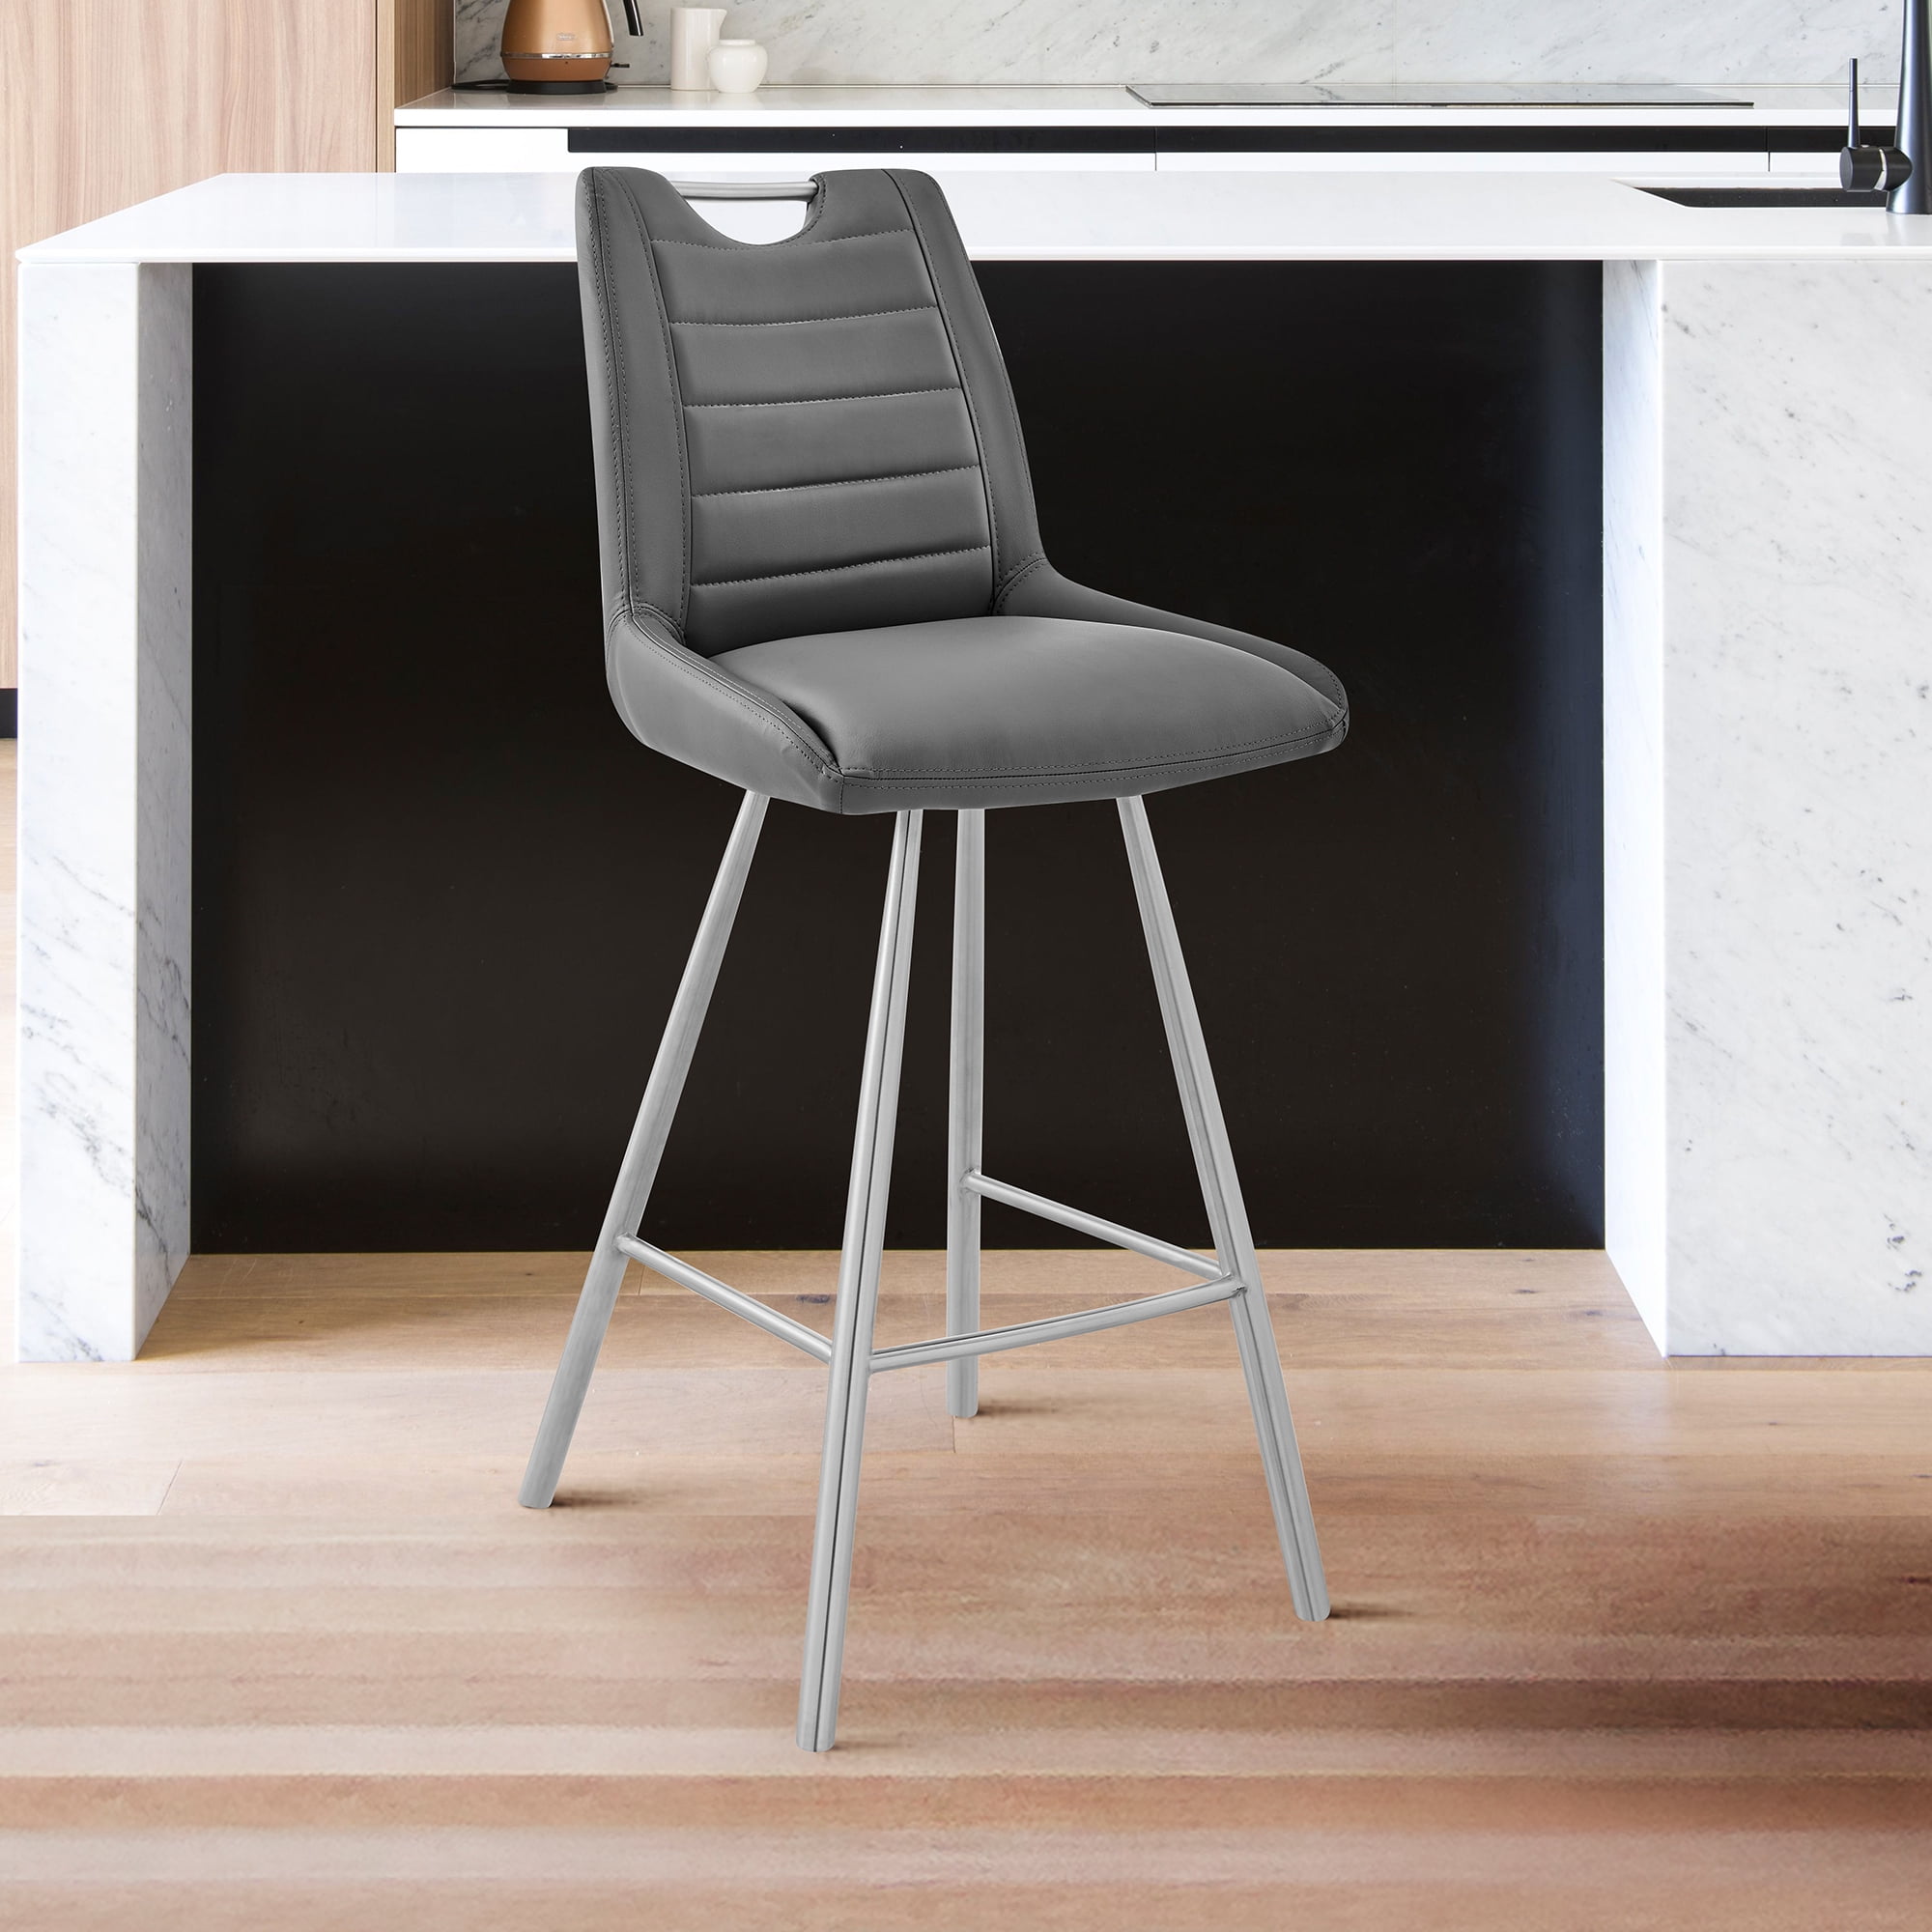 Picture of Armen Living LCAZBAGR26 26 in. Arizona Counter Height Bar Stool in Charcoal Faux Leather & Brushed Stainless Steel Finish